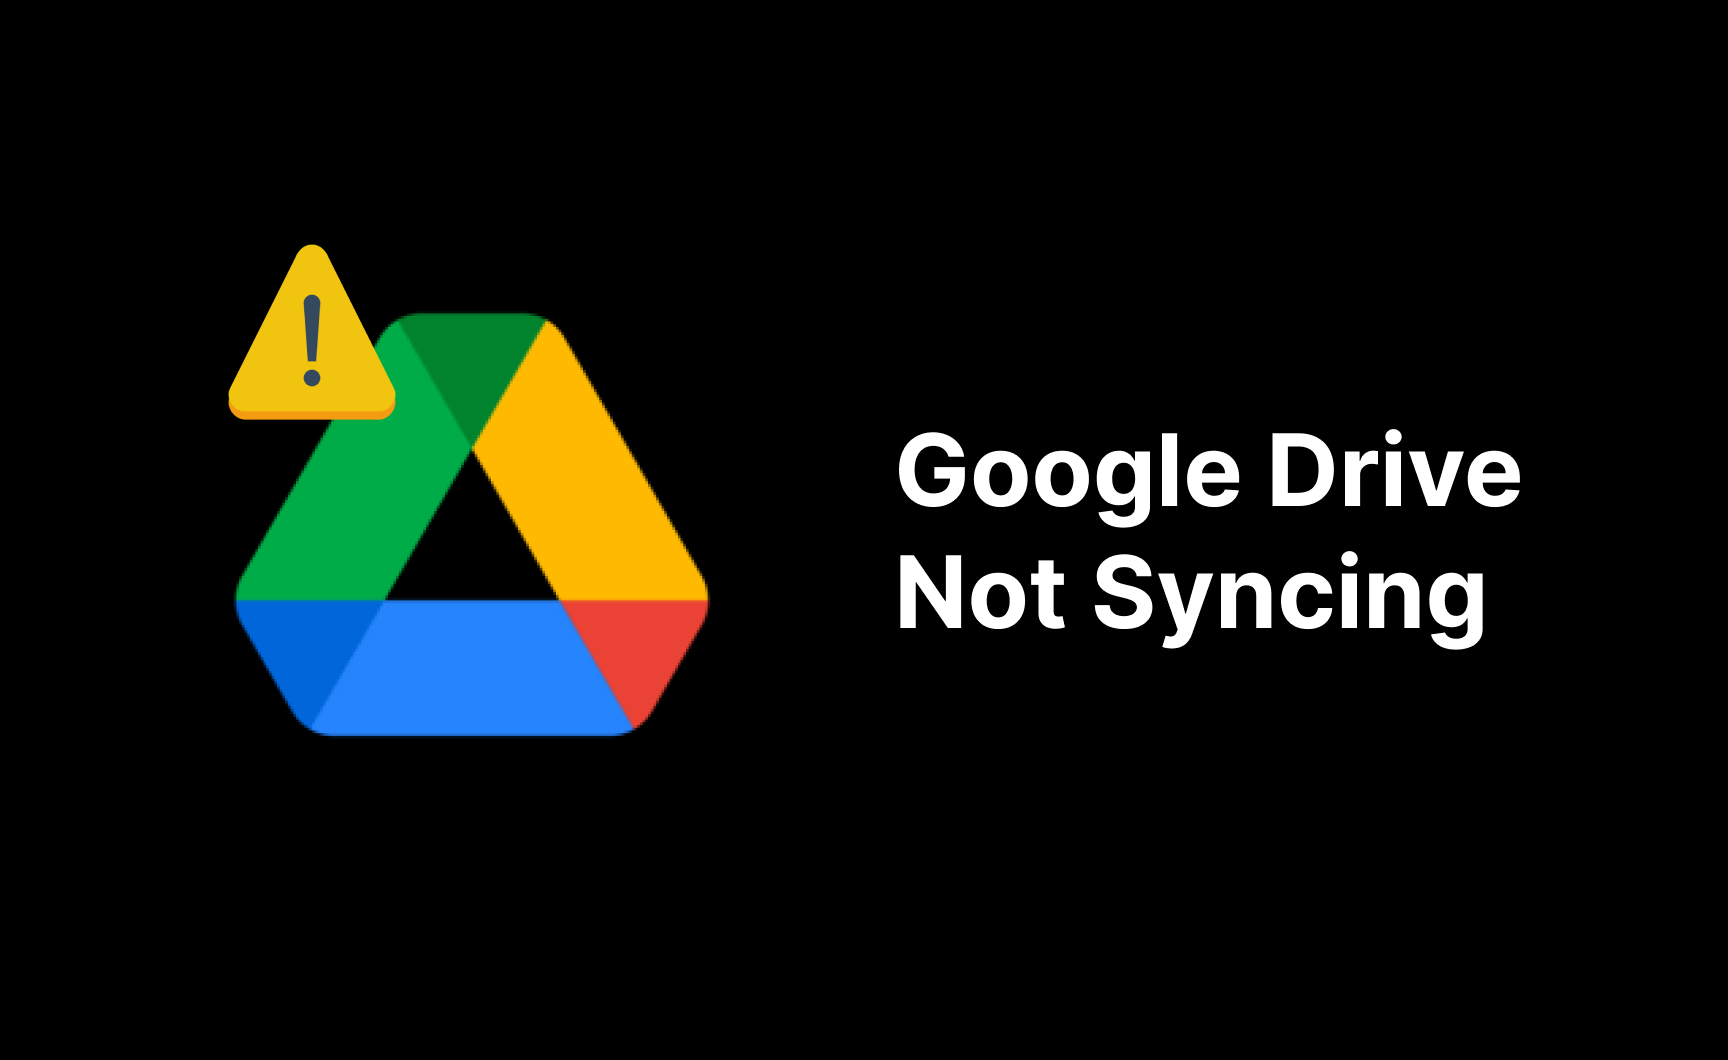 Google Drive Not Syncing: Find Out Why and How to Fix